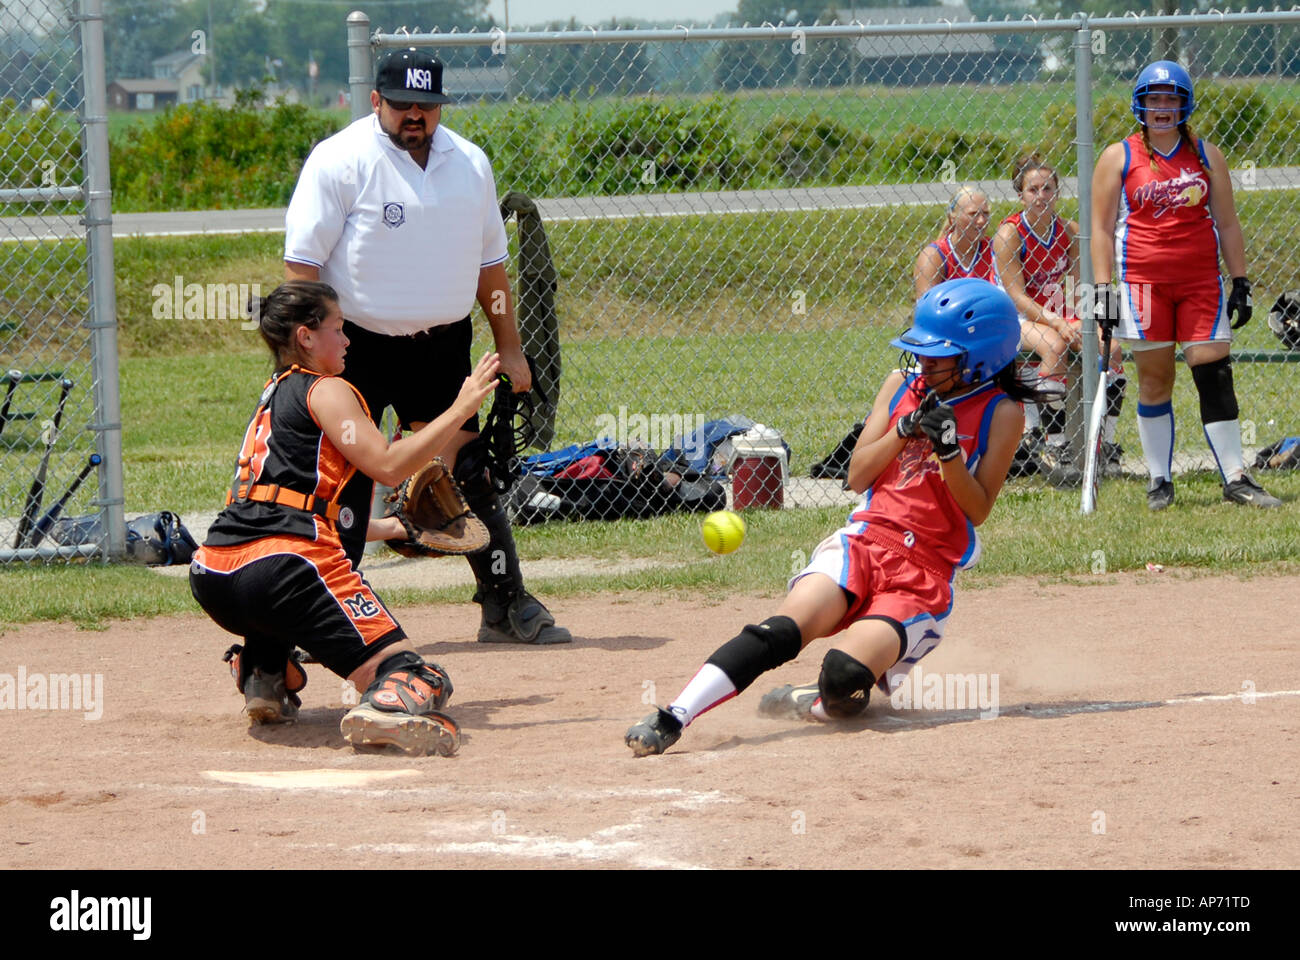 Baseball action girls playing softball running with play at home plate Stock Photo